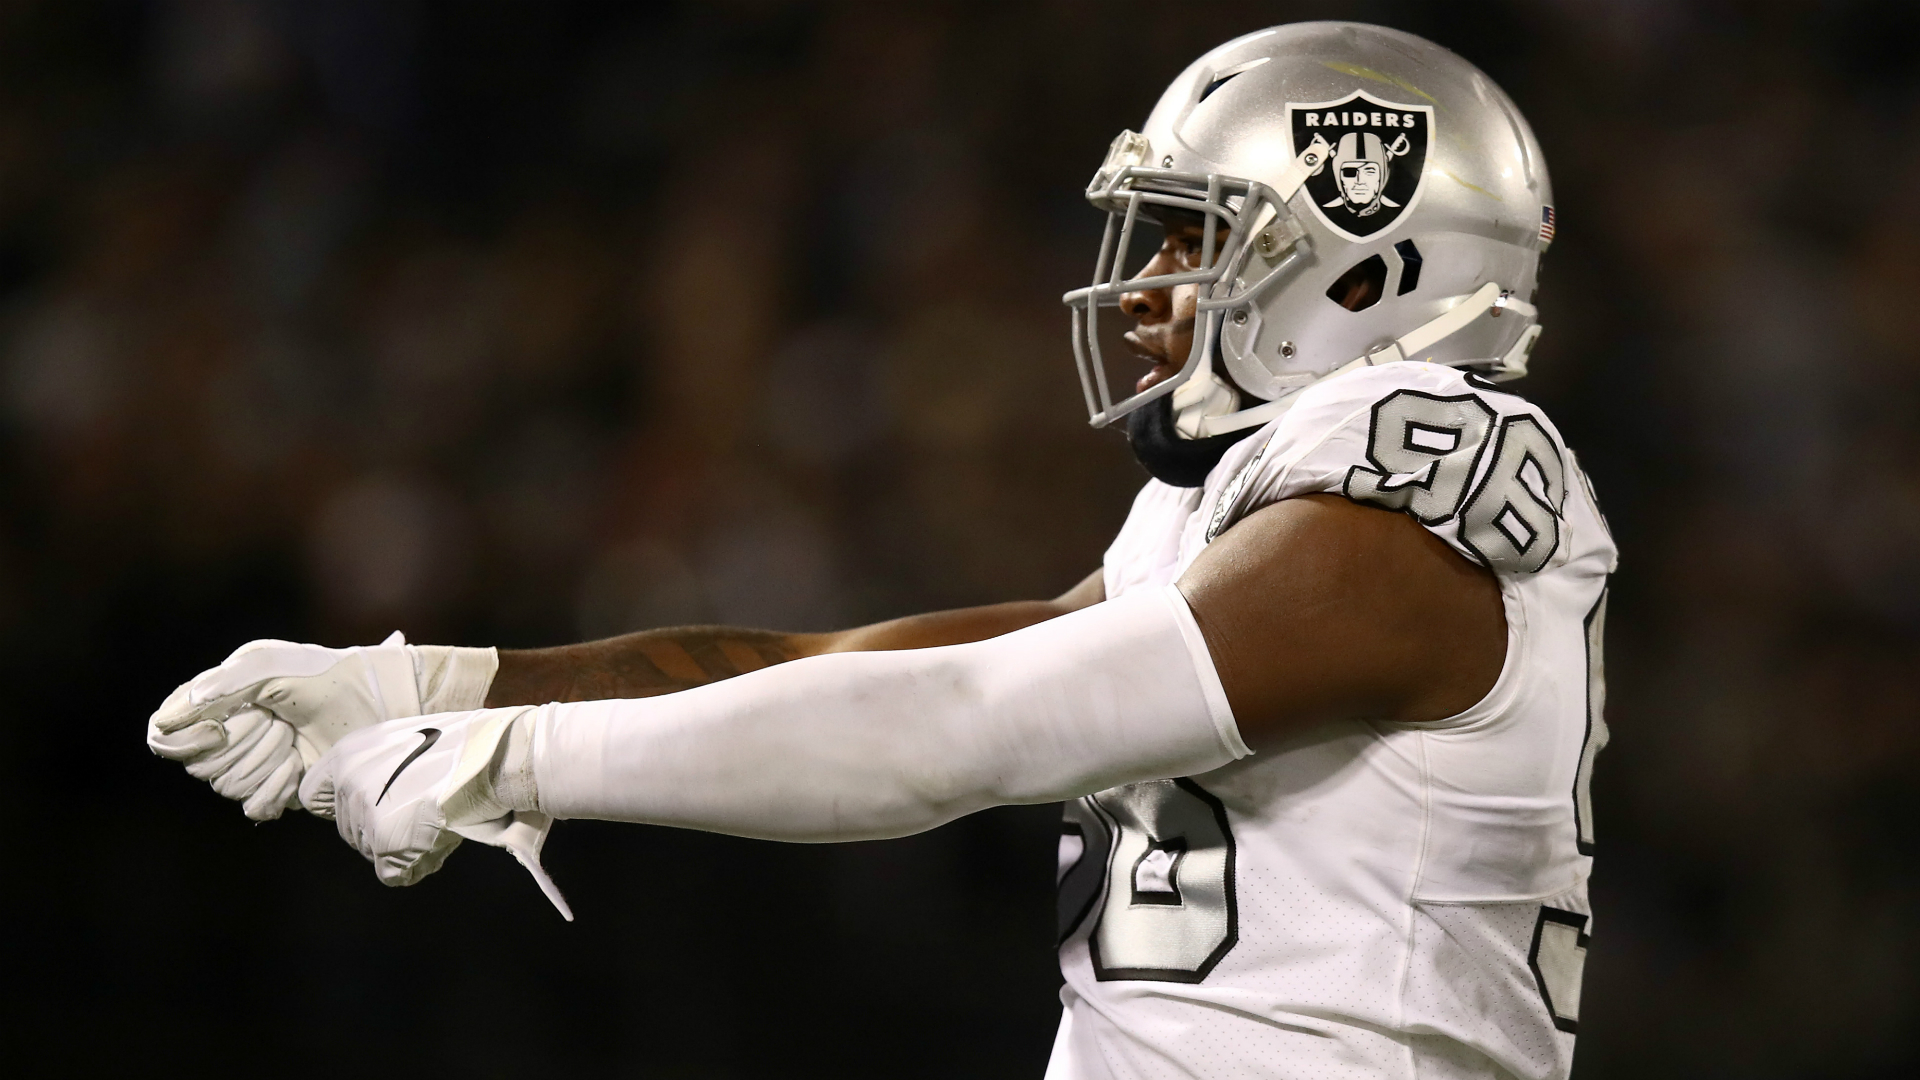 Clelin Ferrell's season sack total increased from one to 3.5 after he had a starring role in the Raiders' thrilling win over the Chargers.